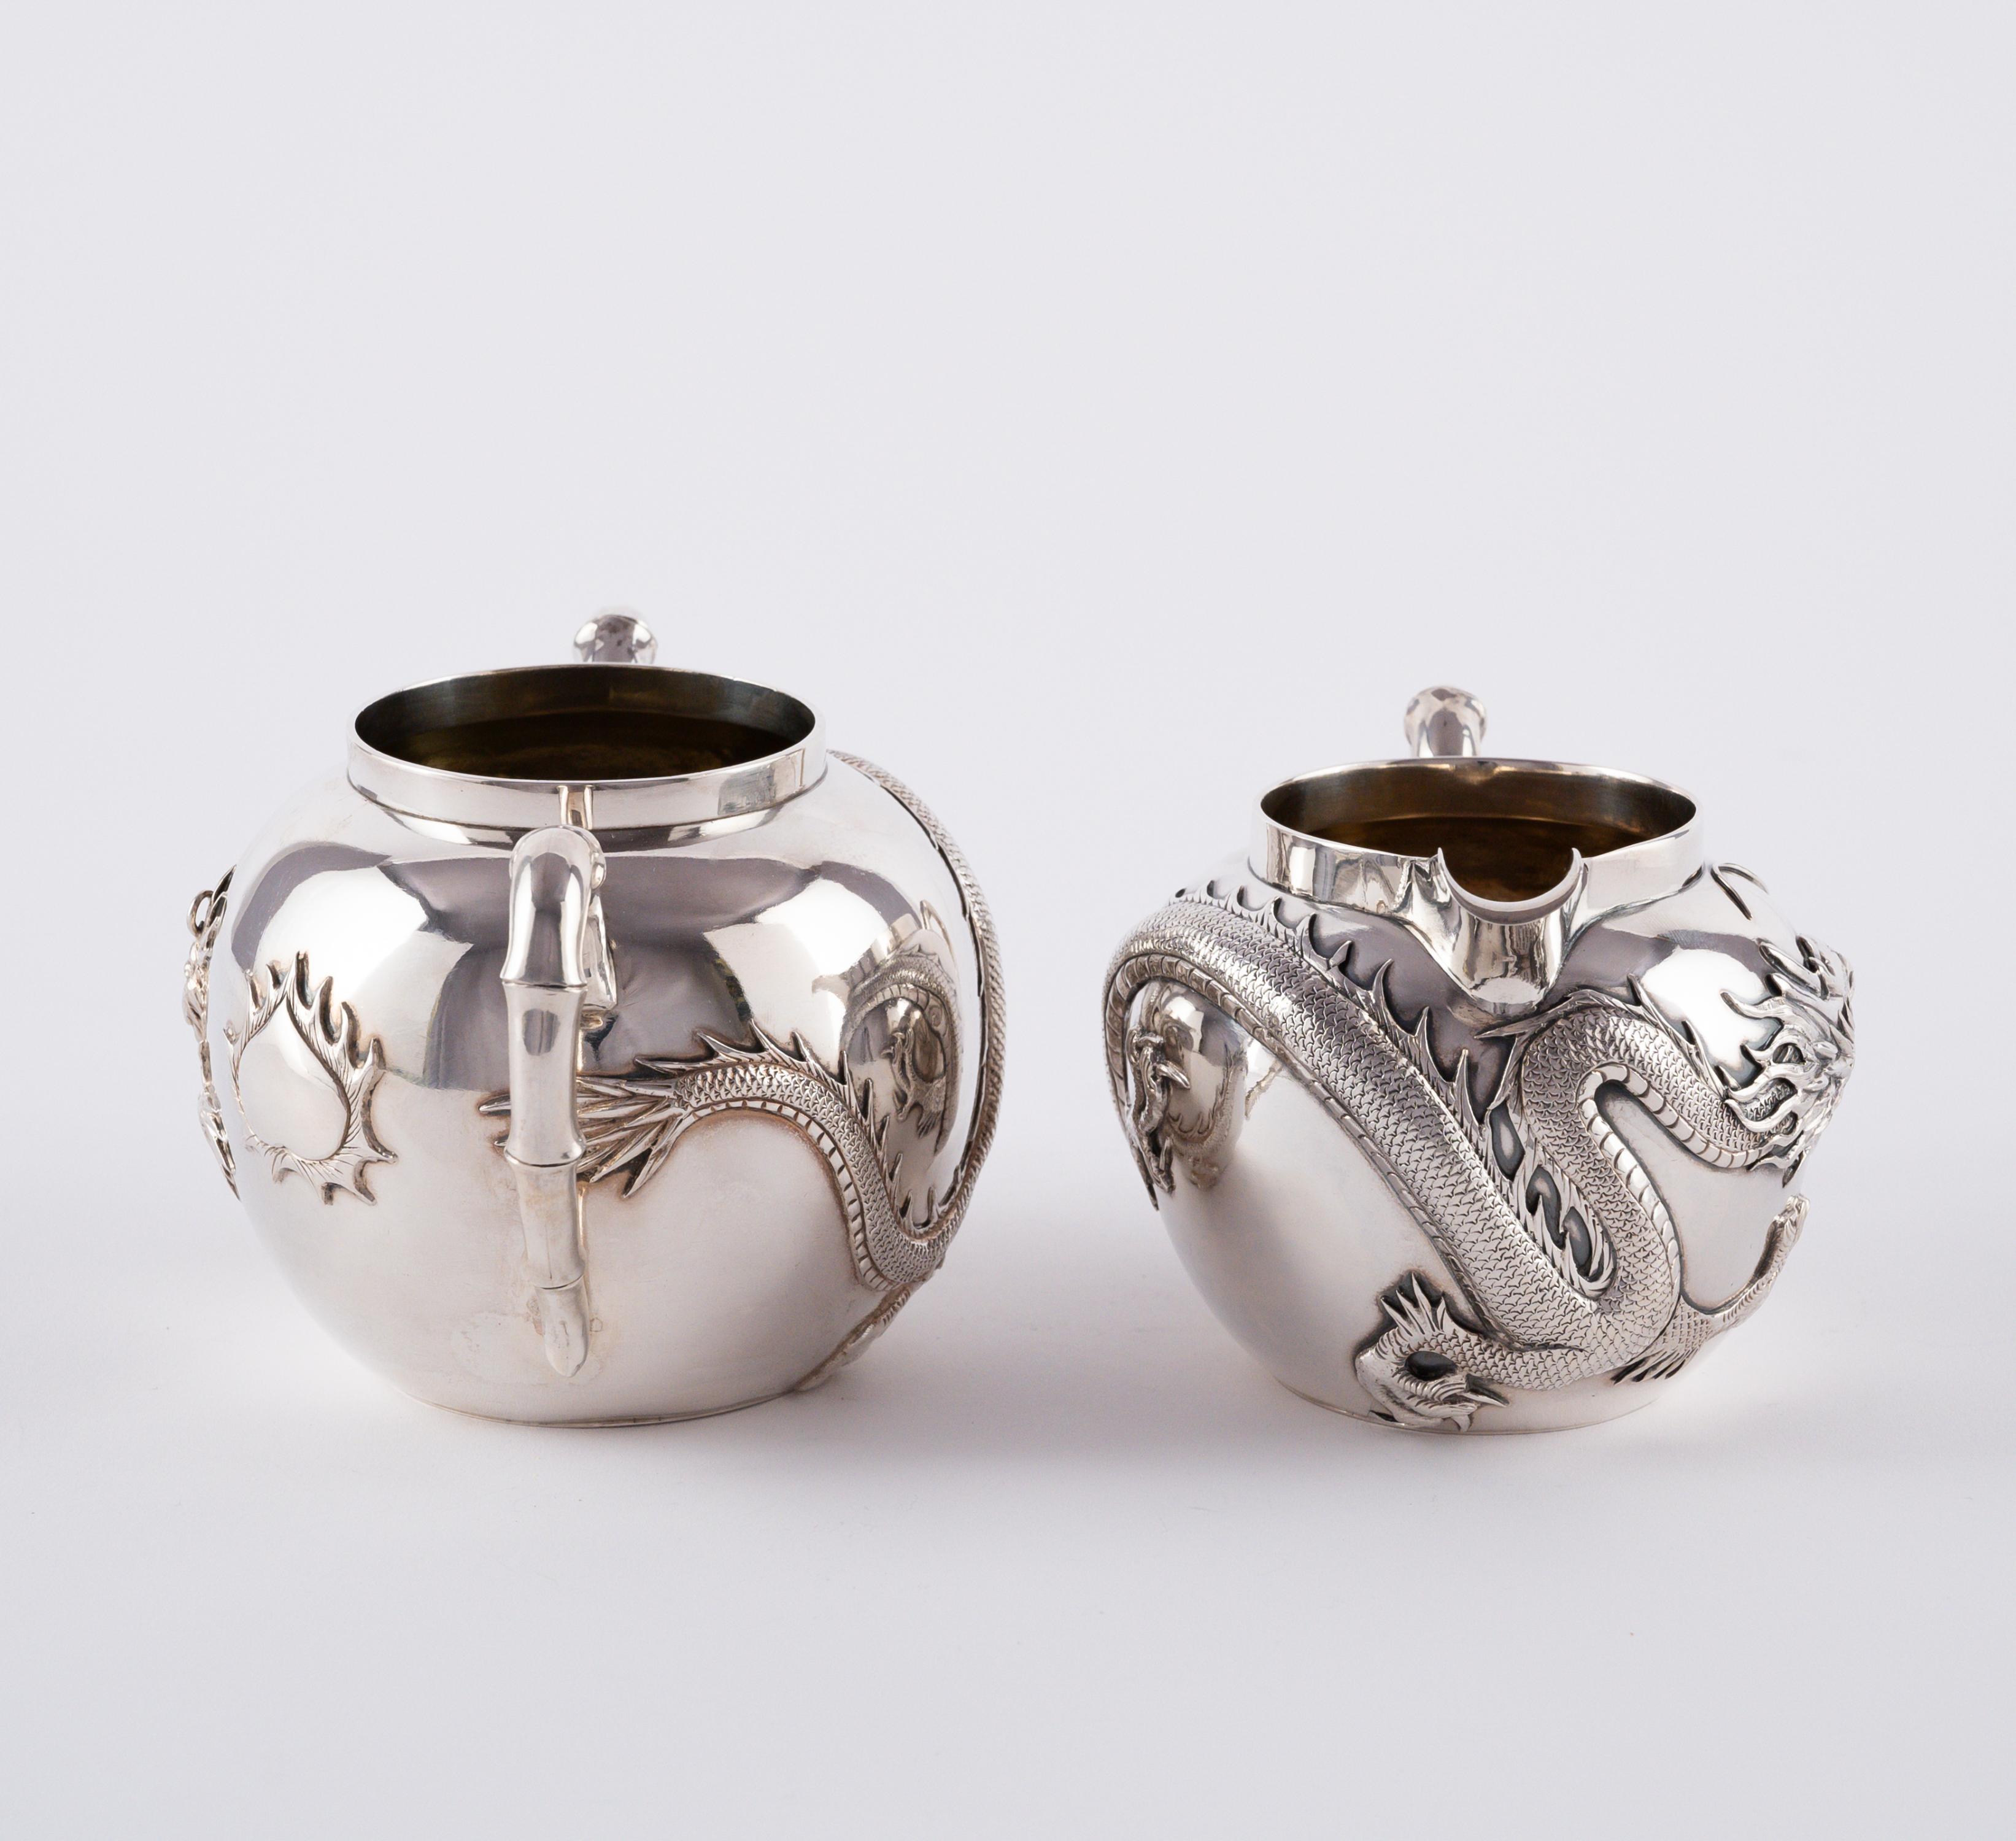 EXCEPTIONAL SILVER TEA SERVICE WITH DRAGON DECORATION - Image 10 of 12